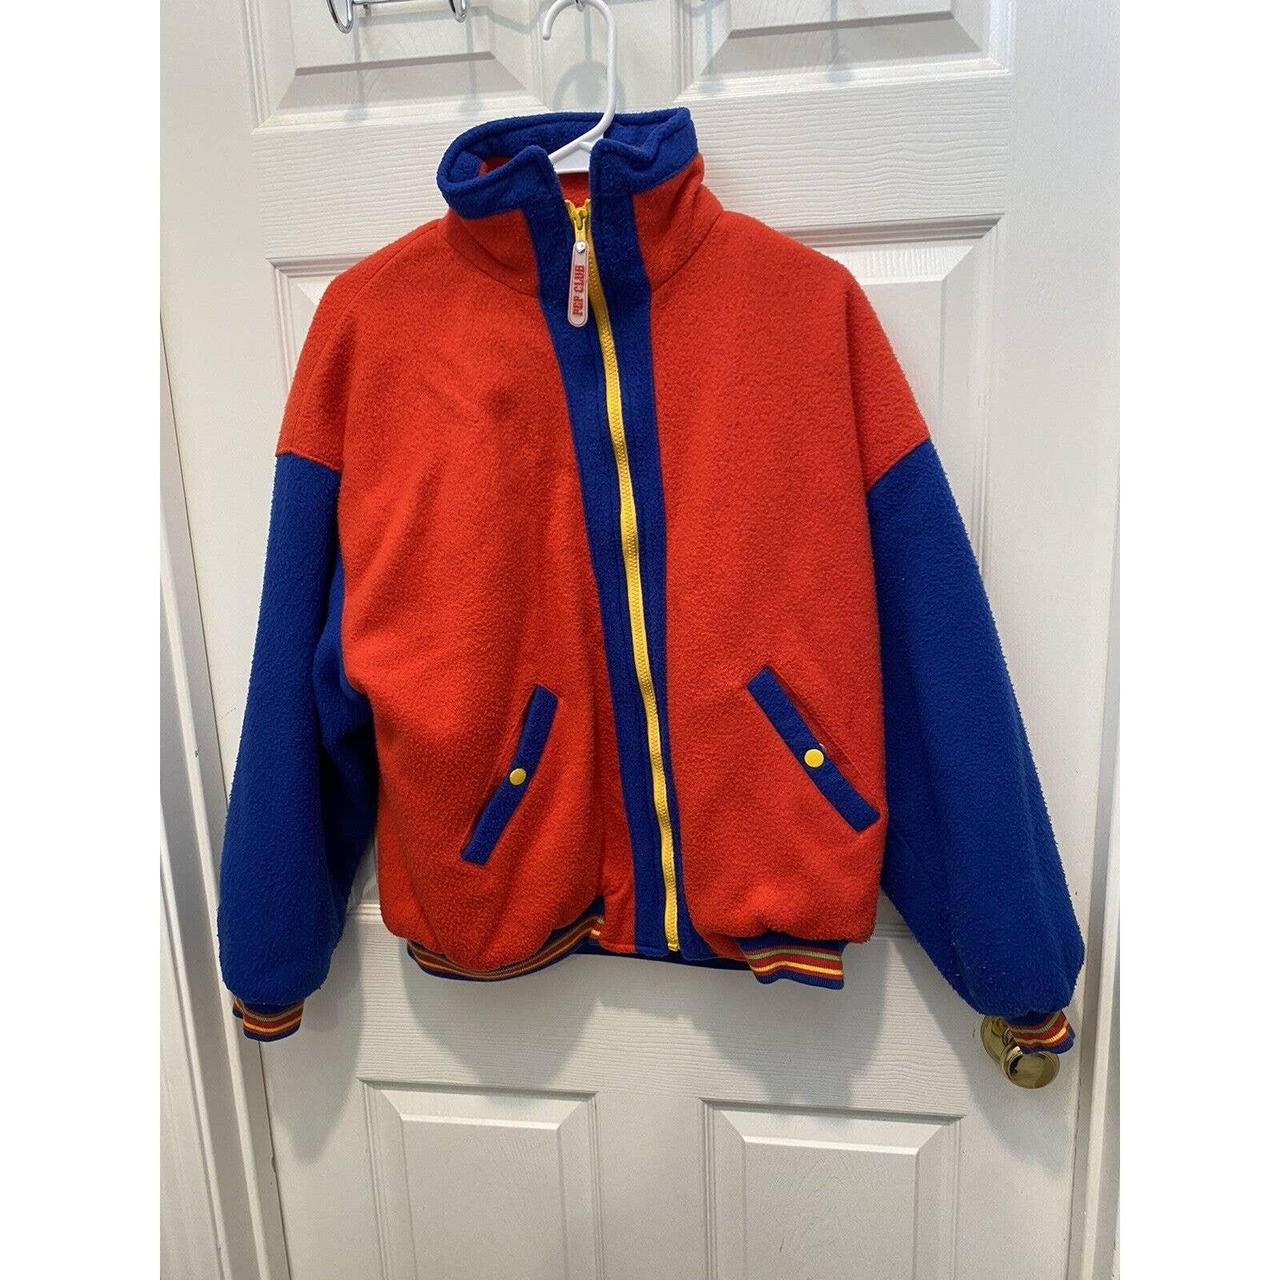 Gitano Men's Red and Blue Jacket